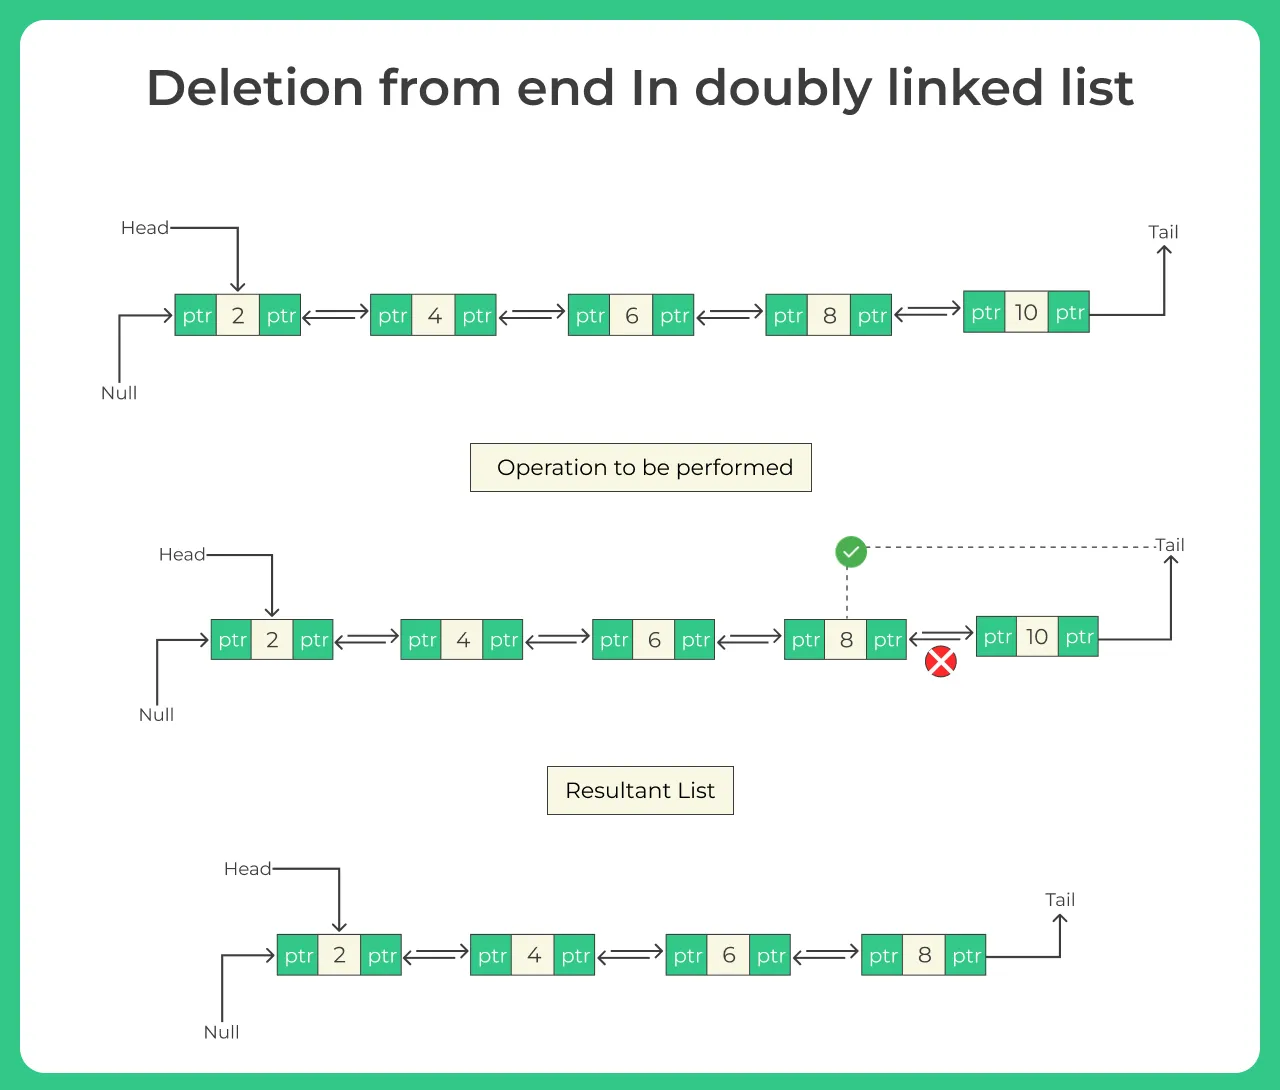 Deletion from end in a doubly linked list